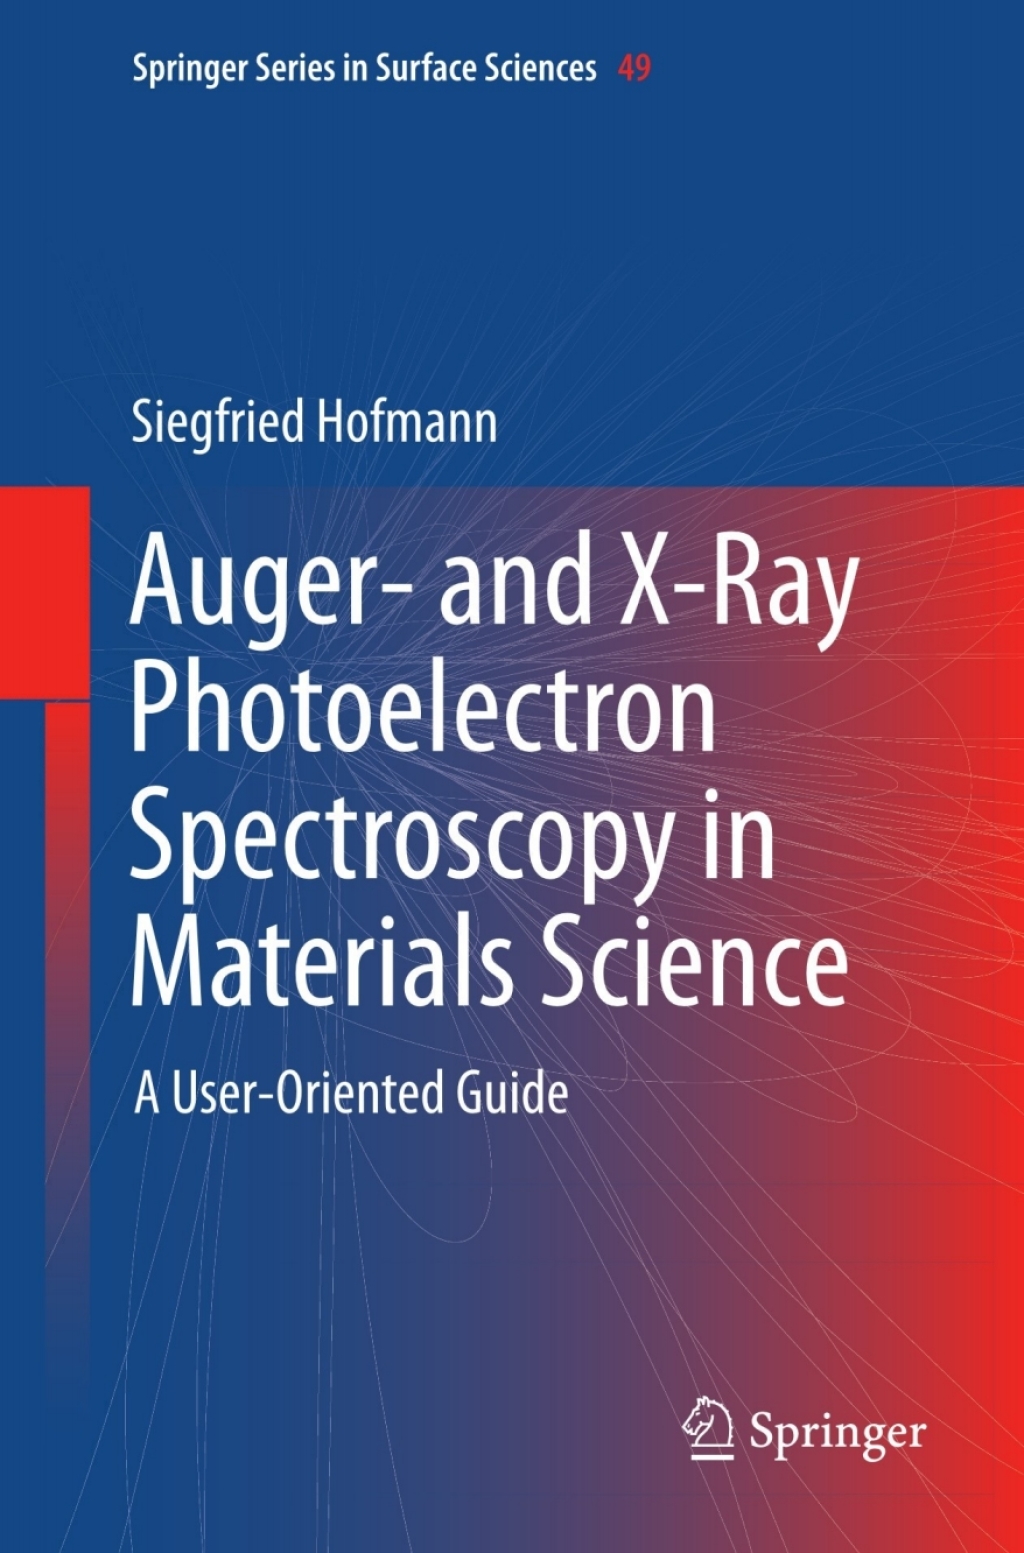 Auger- and X-Ray Photoelectron Spectroscopy in Materials Science (eBook) - Siegfried Hofmann,